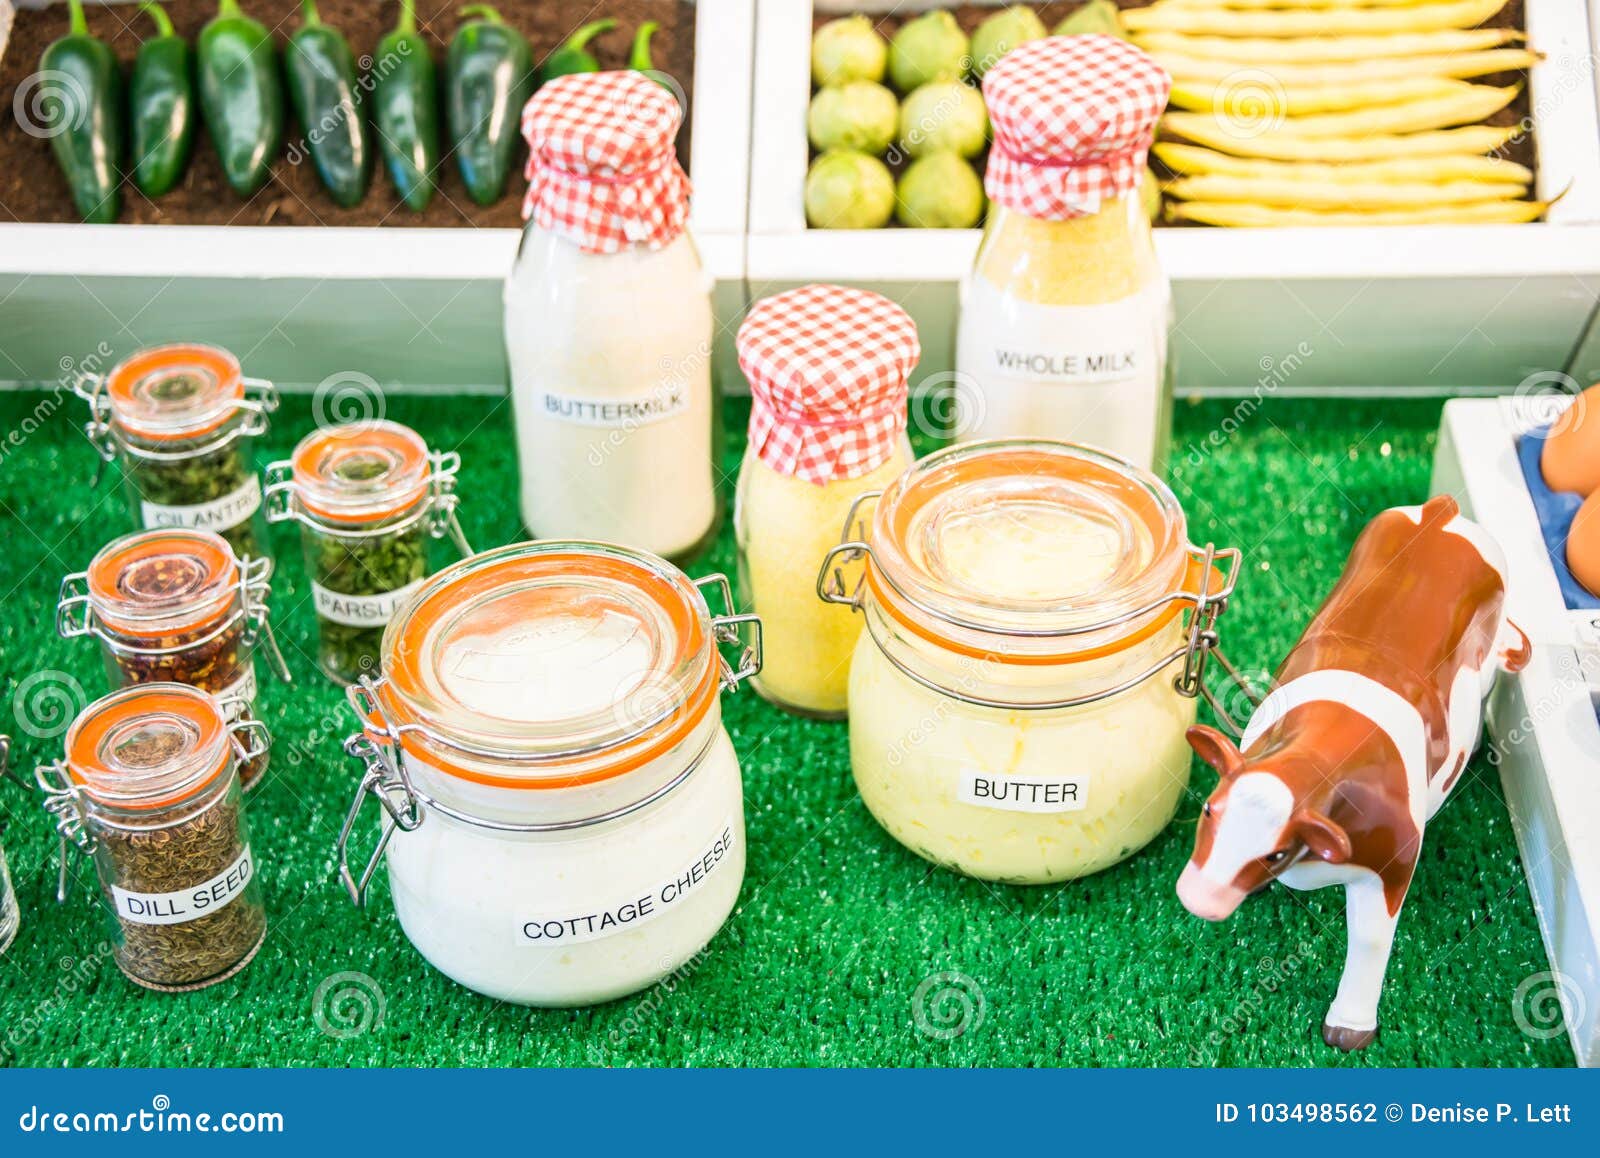 Jars And Bottles Of Dairy Products And Seeds Stock Photo Image